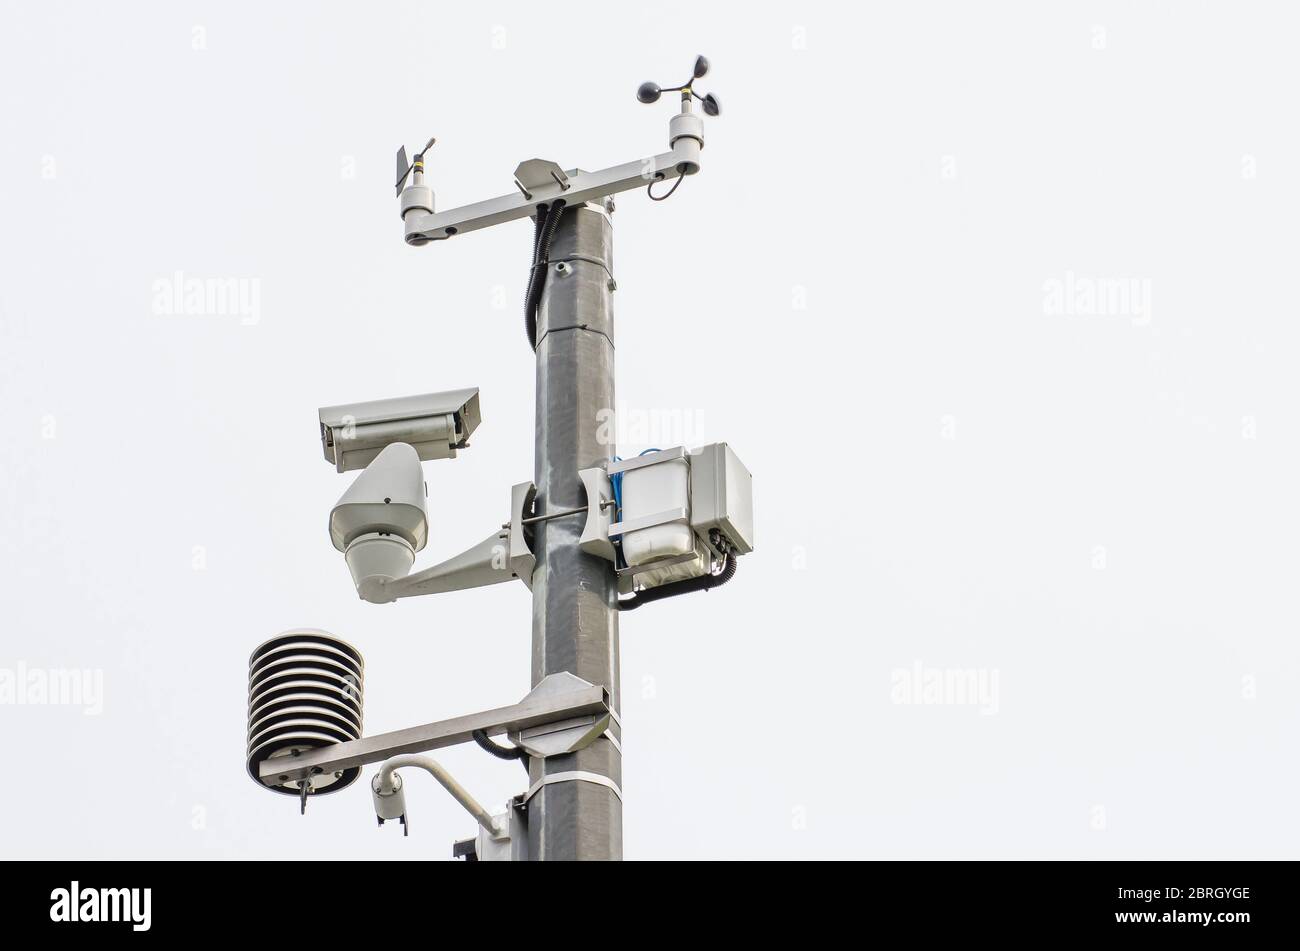 Automatic meteorological station complex with video cameras located in the city Stock Photo